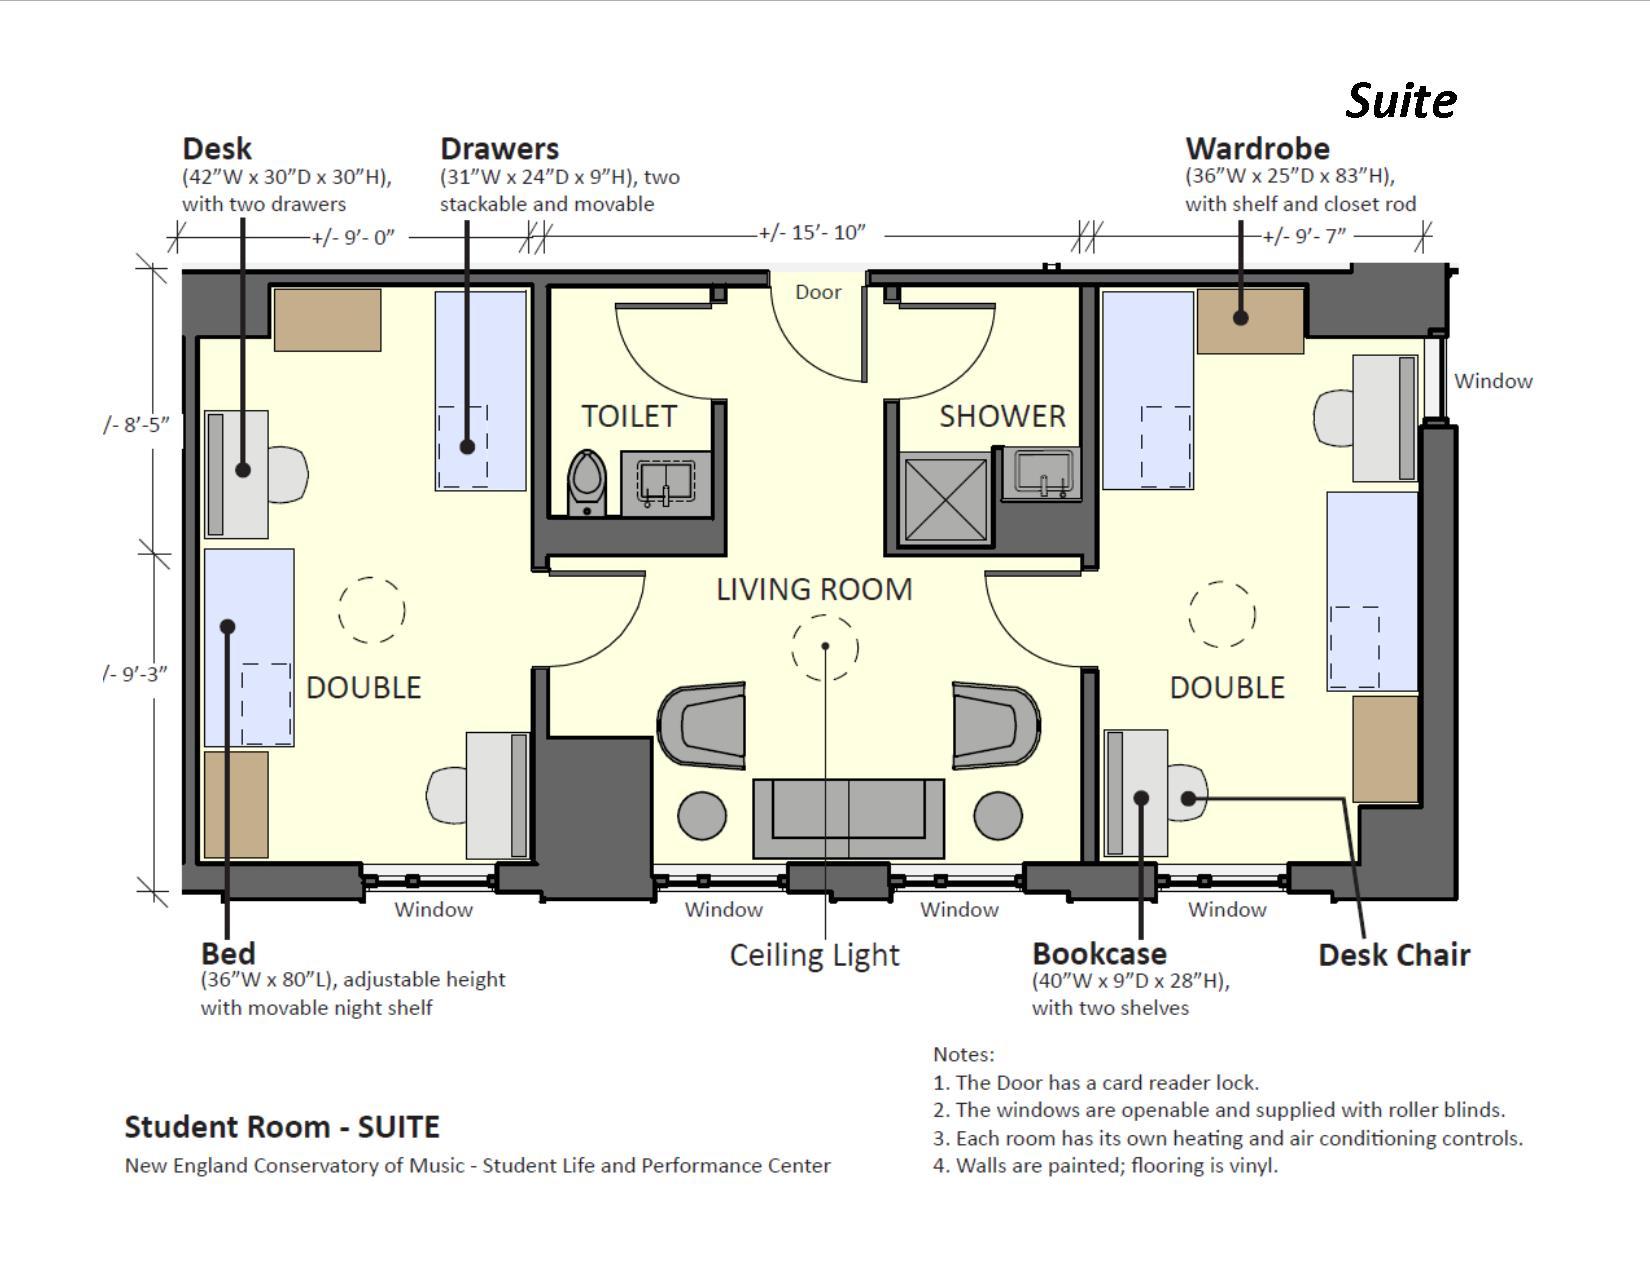 Sample Residence Room Layouts | New England Conservatory